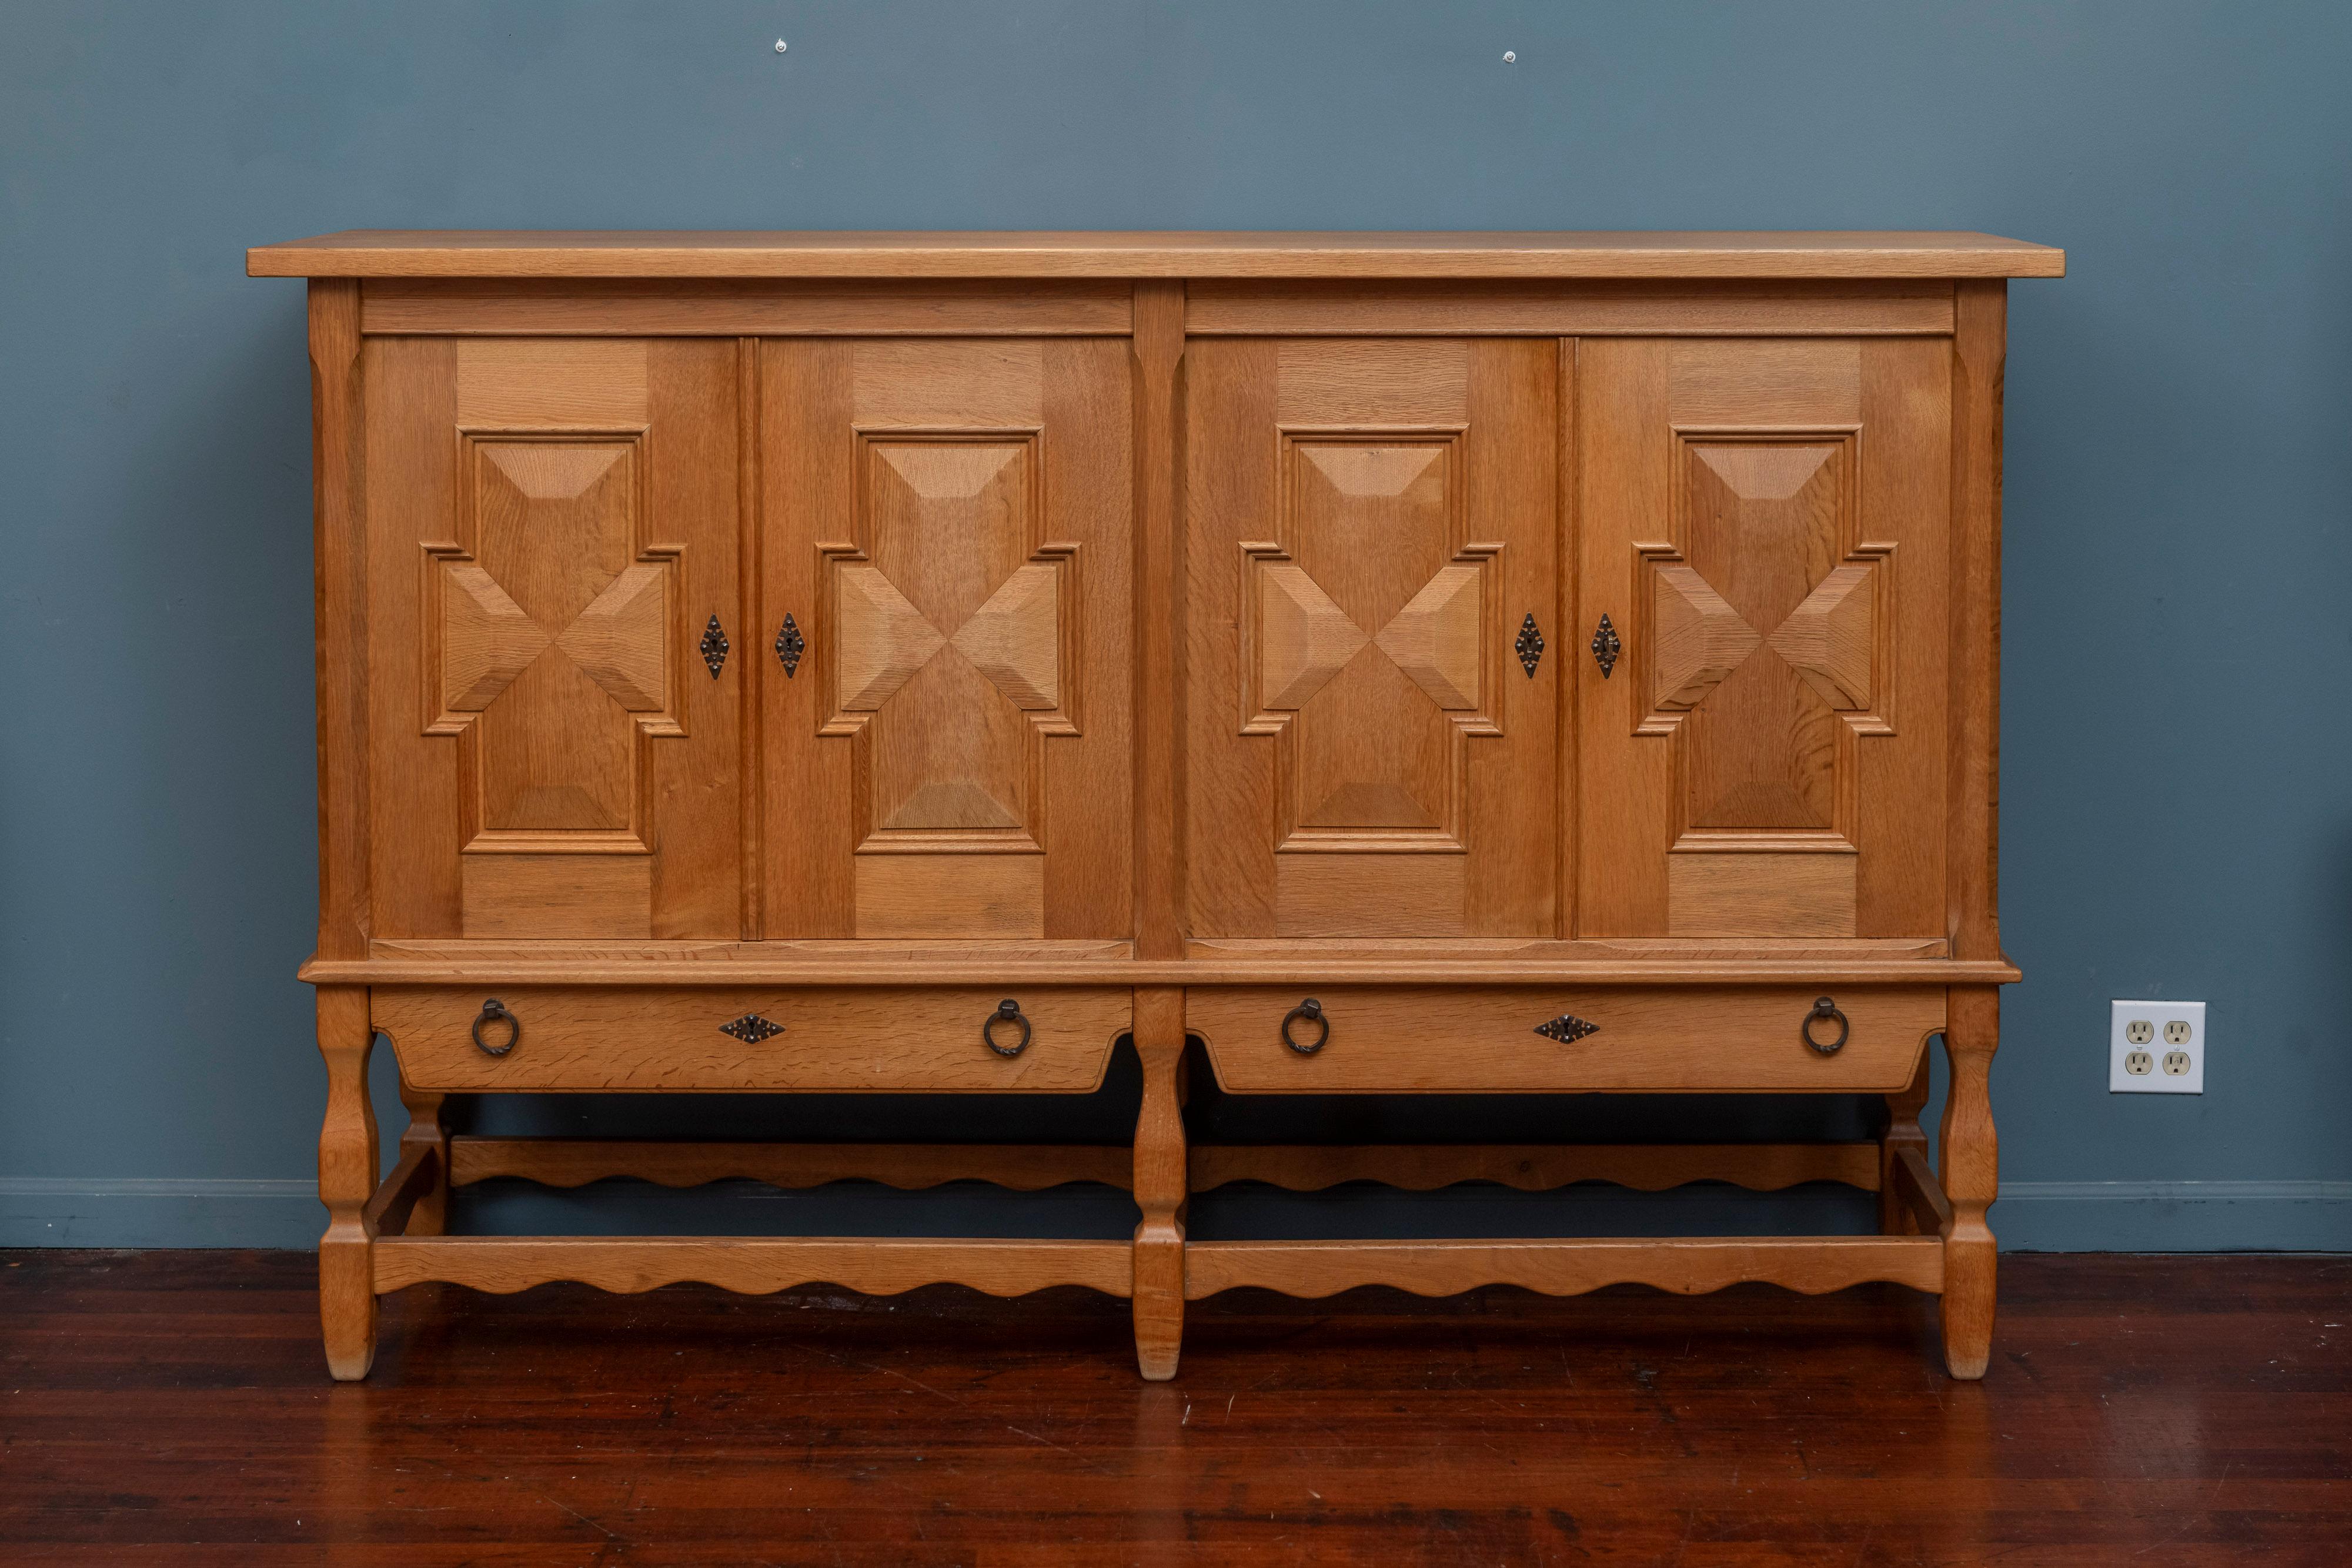 Henning Kjaernulf design cabinet or buffet, Denmark. High quality construction and use of materials in solid oak with metal mounts. A great storage cabinet or used as buffet with carved panels and details with fitted interiors comprising drawers and